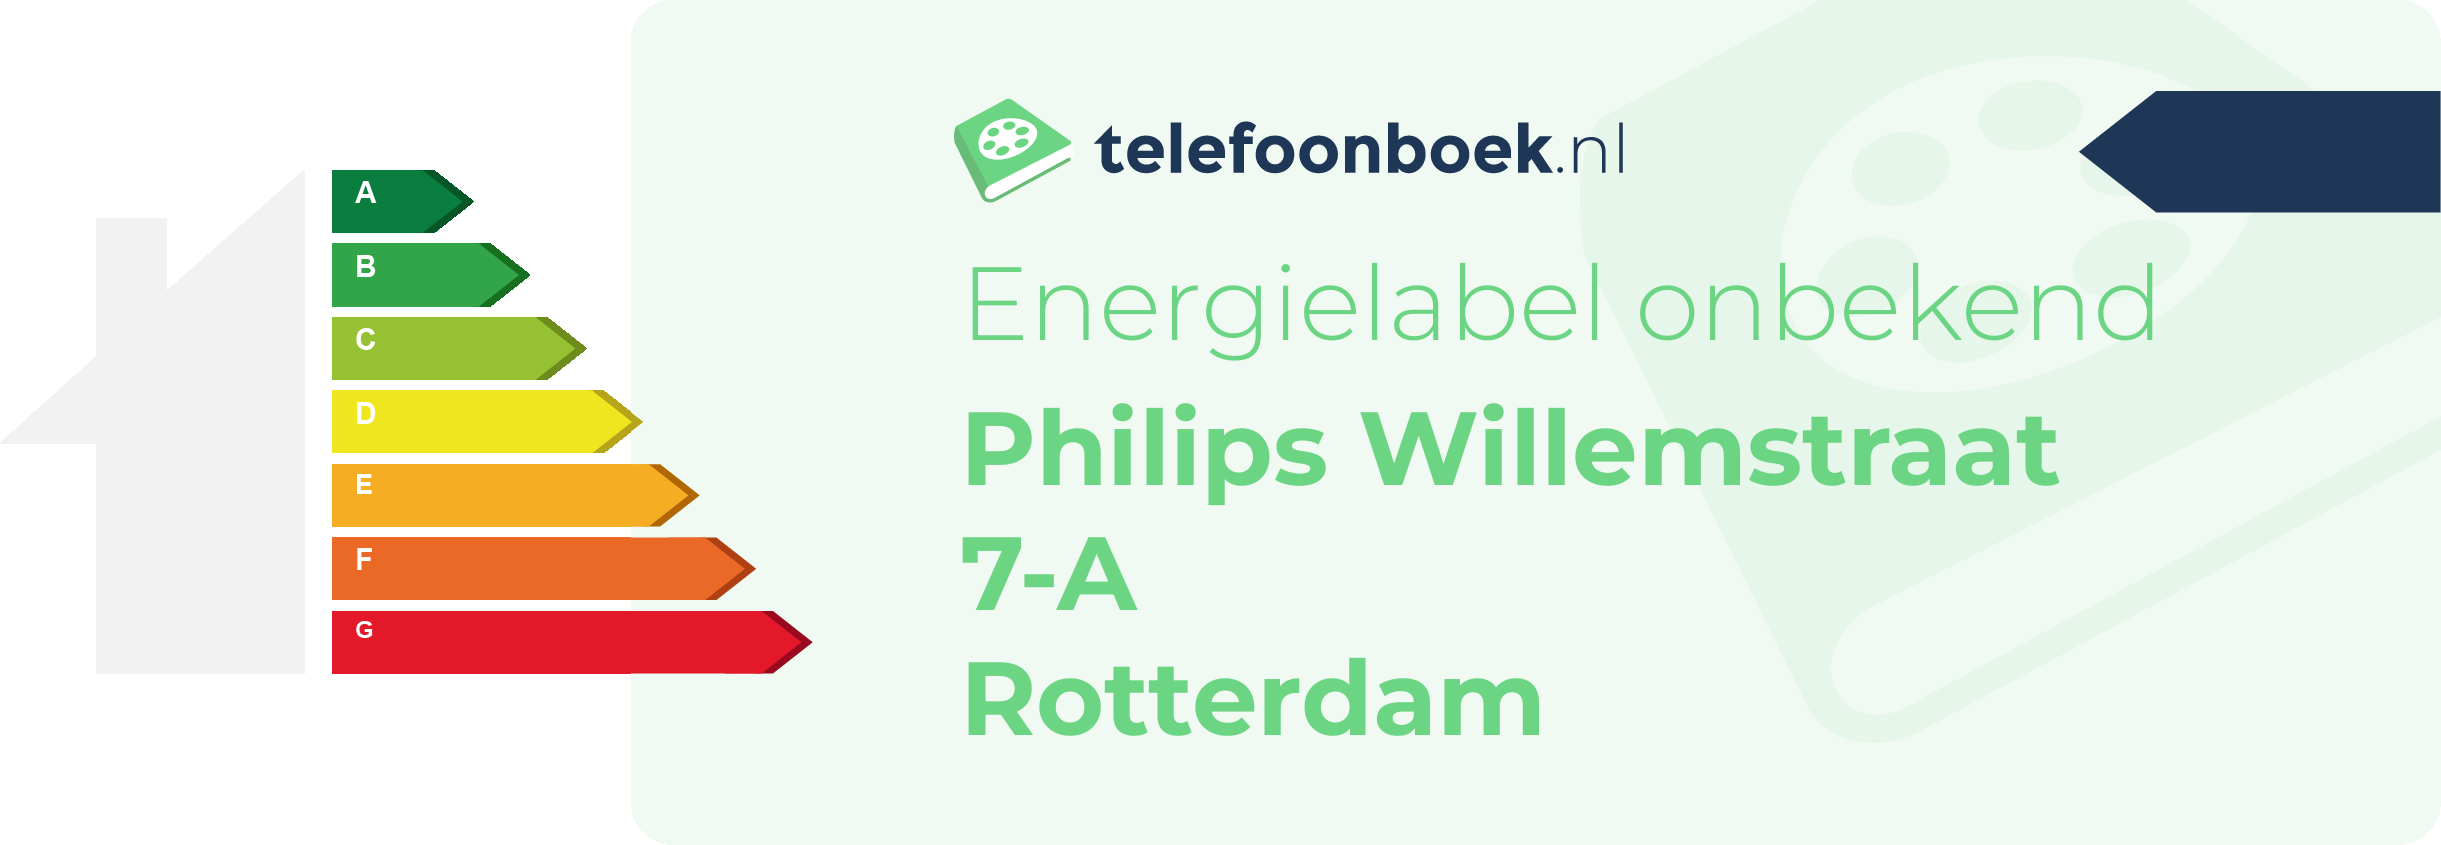 Energielabel Philips Willemstraat 7-A Rotterdam